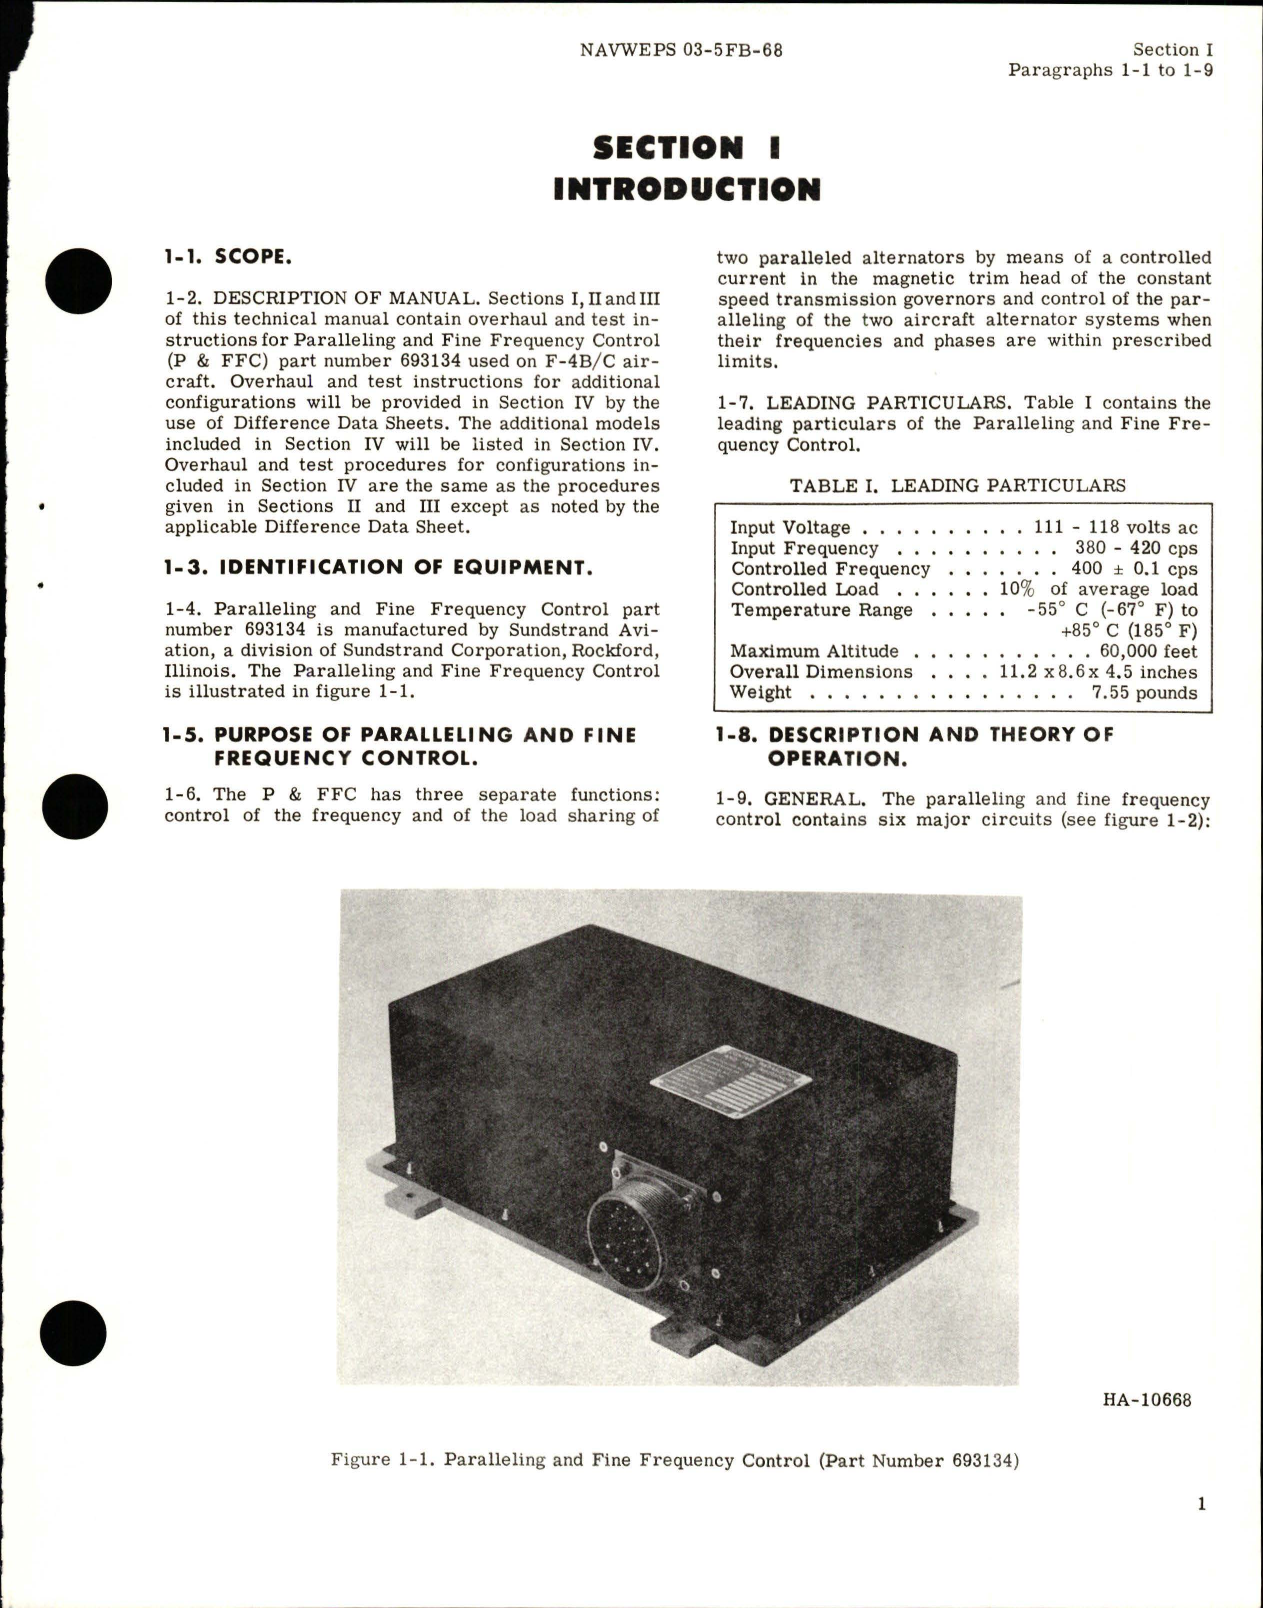 Sample page 5 from AirCorps Library document: Overhaul Instructions for Paralleling & Fine Frequency Control - Part 693134  - F-4B/C